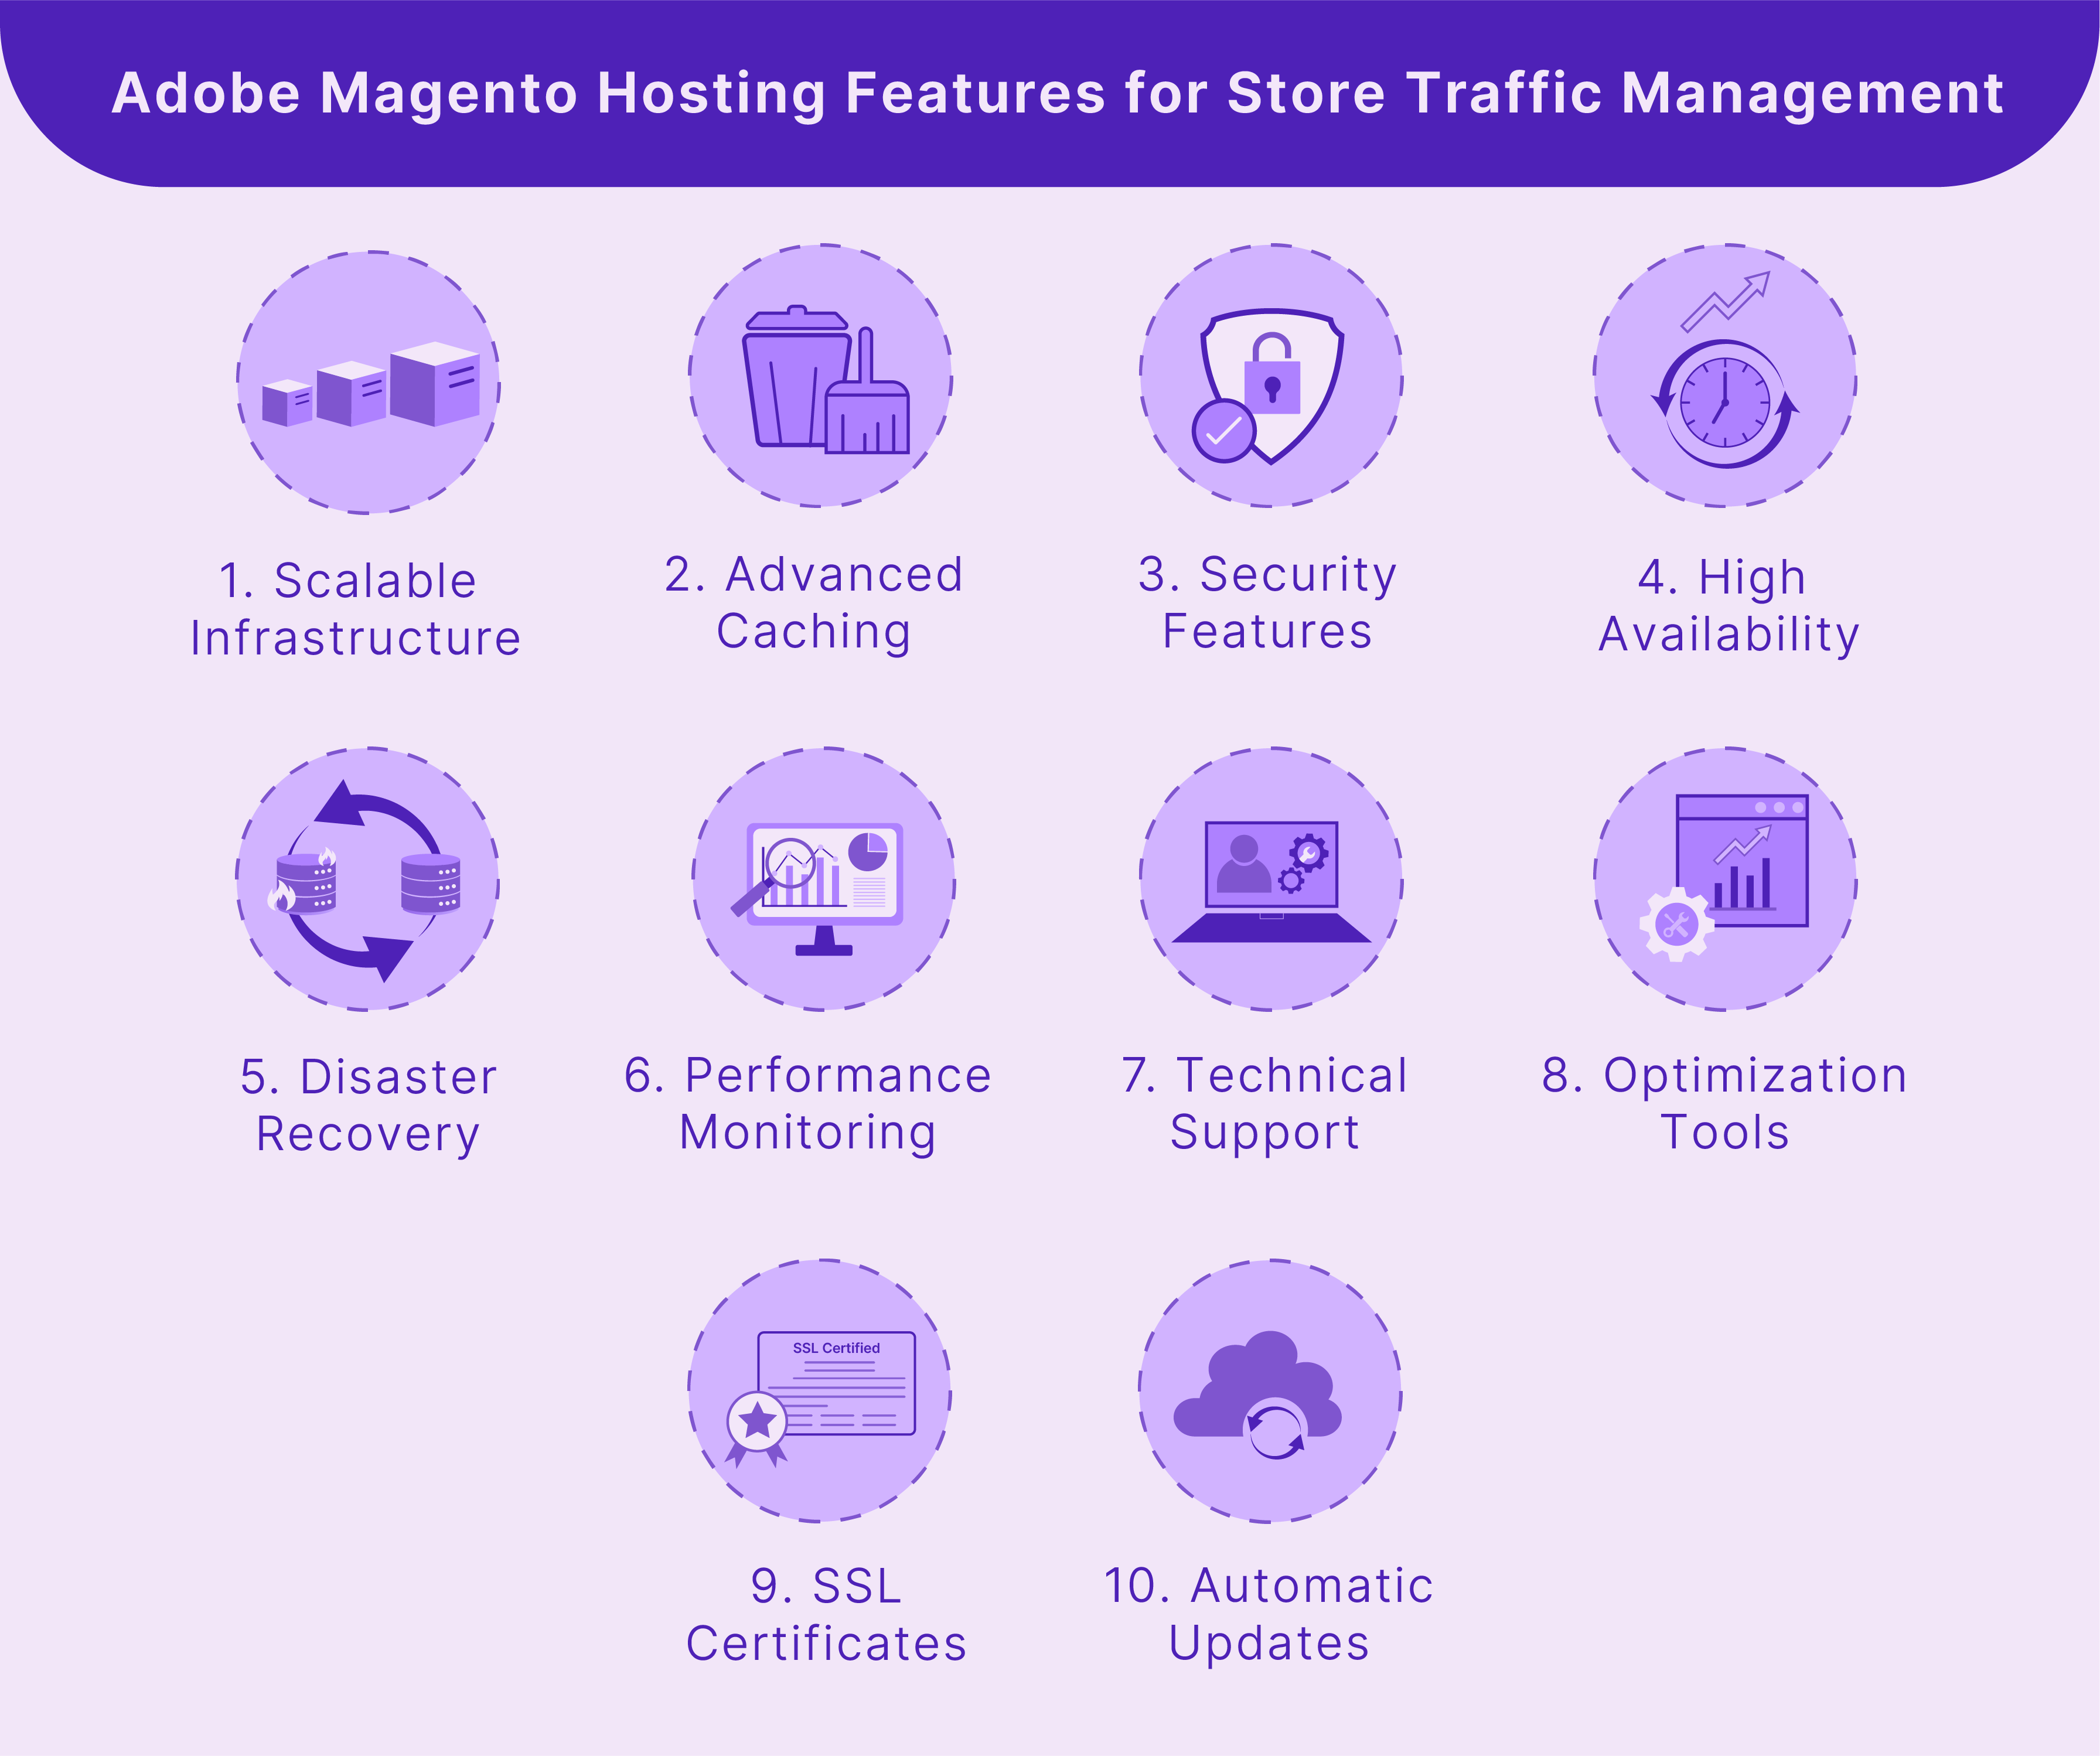 Features of Adobe Magento Hosting